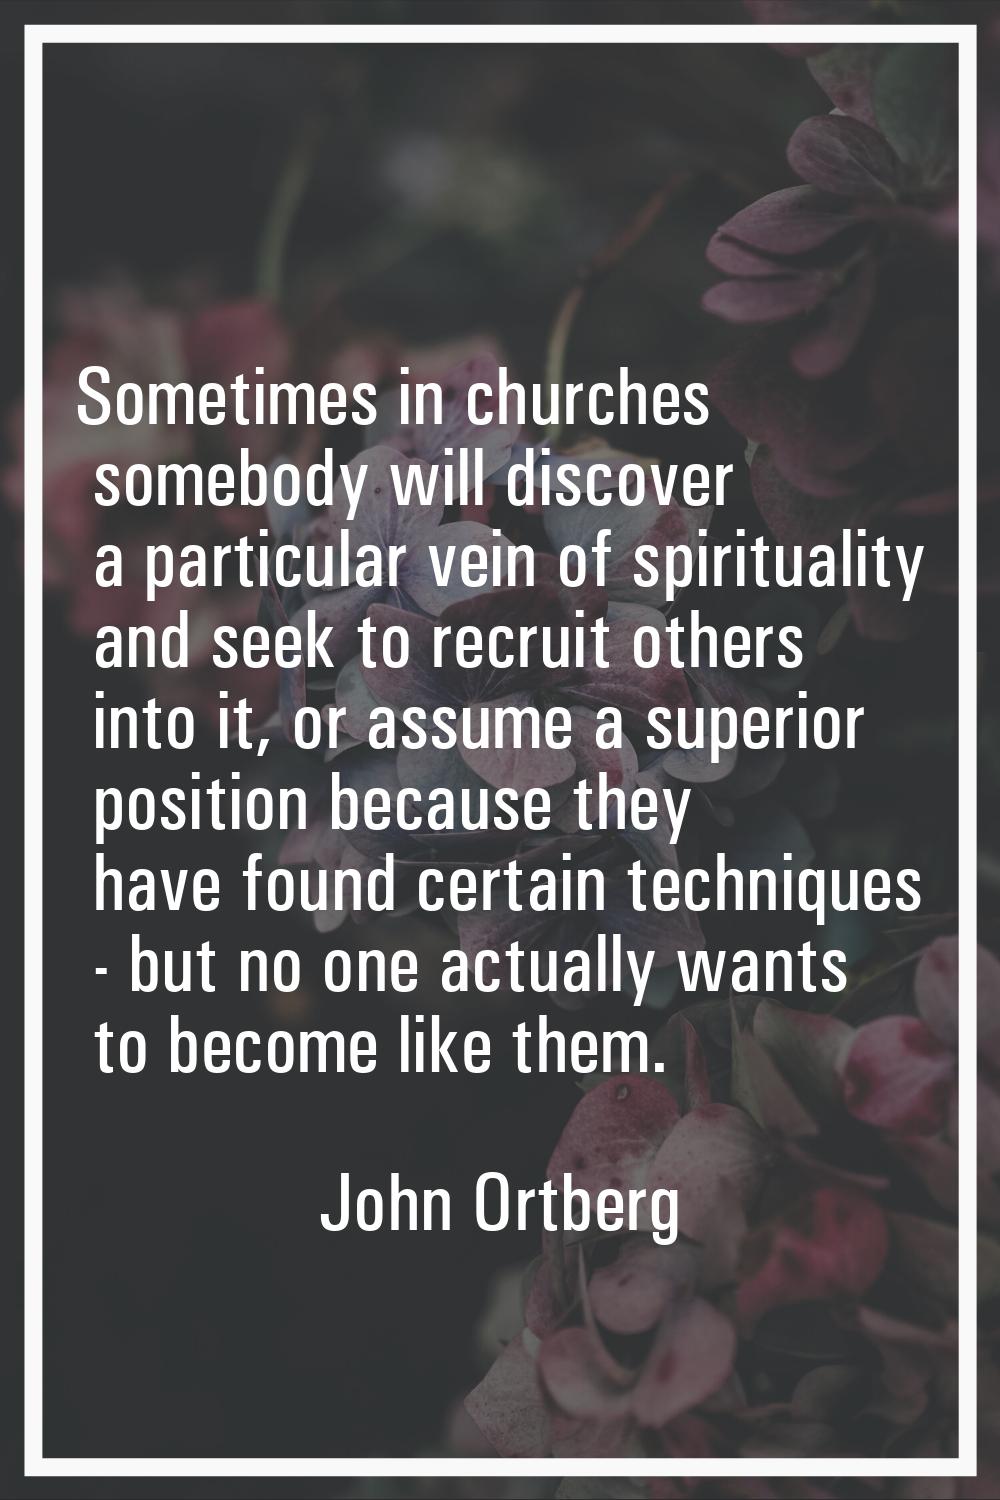 Sometimes in churches somebody will discover a particular vein of spirituality and seek to recruit 